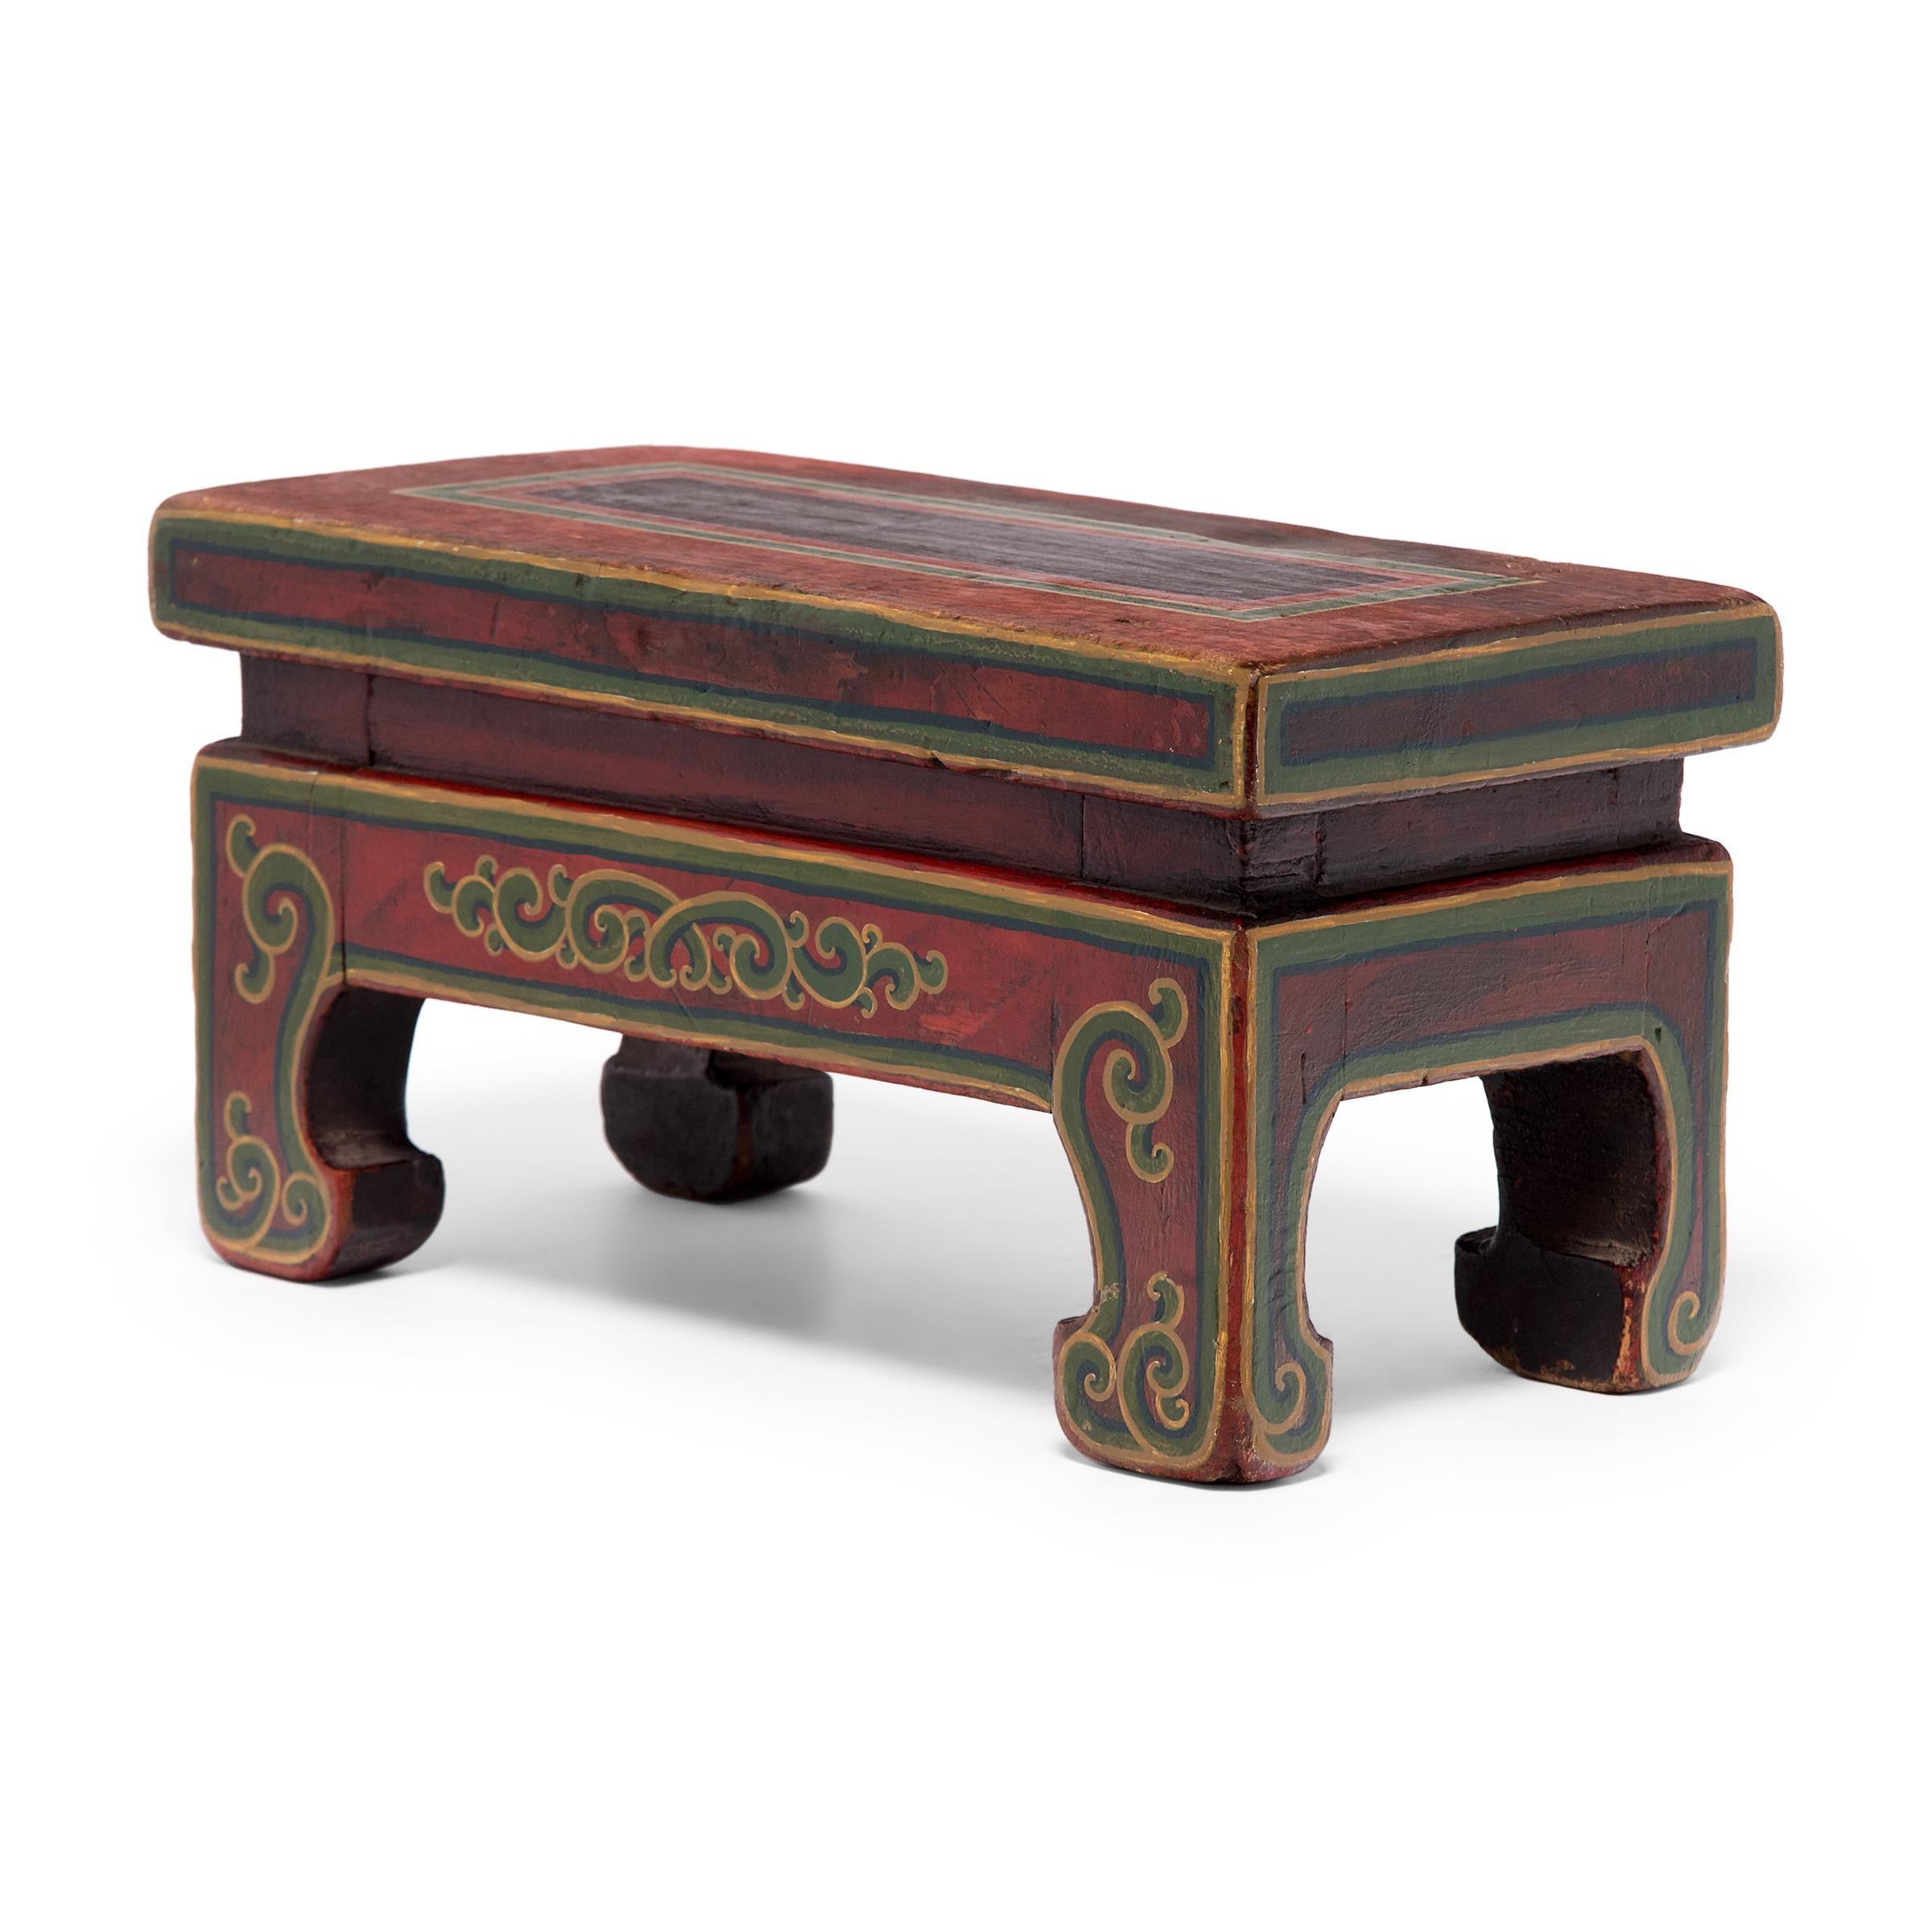 Resembling a low kang table, this small table stand is simply shaped with a waisted apron and four short legs ending in hoof feet. Decorated in the style of Mongolian and Tibetan furniture, the stand is painted red on all sides and outlined by a